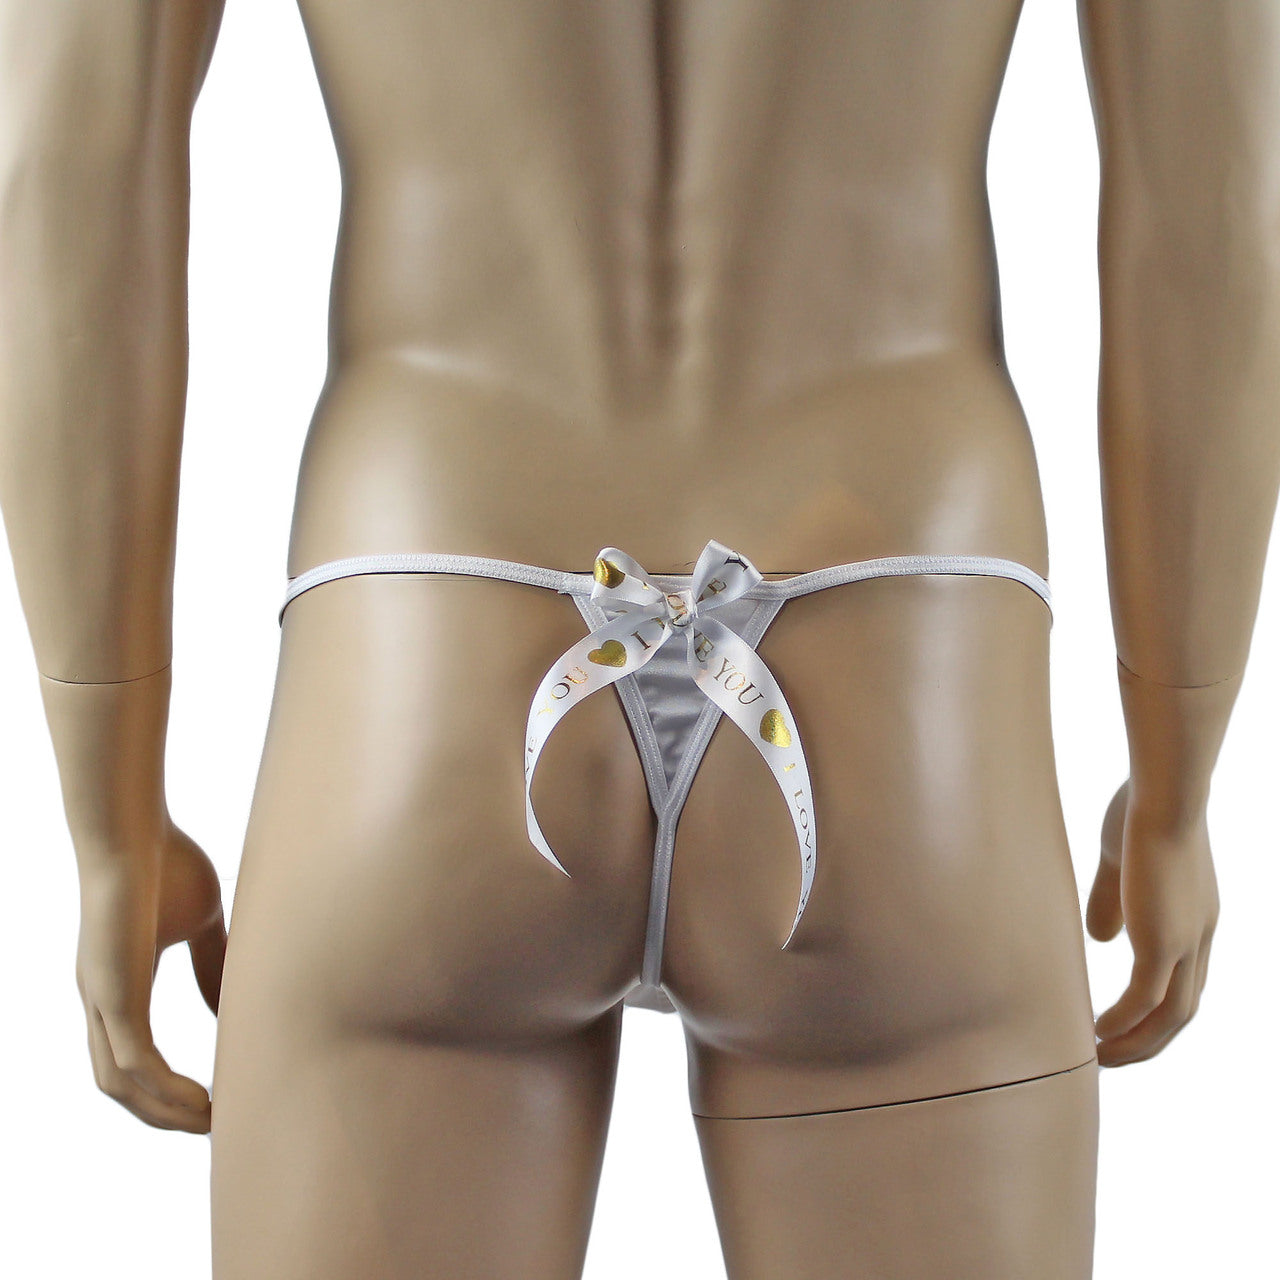 Mens Love Pouch G string with Bow Back White